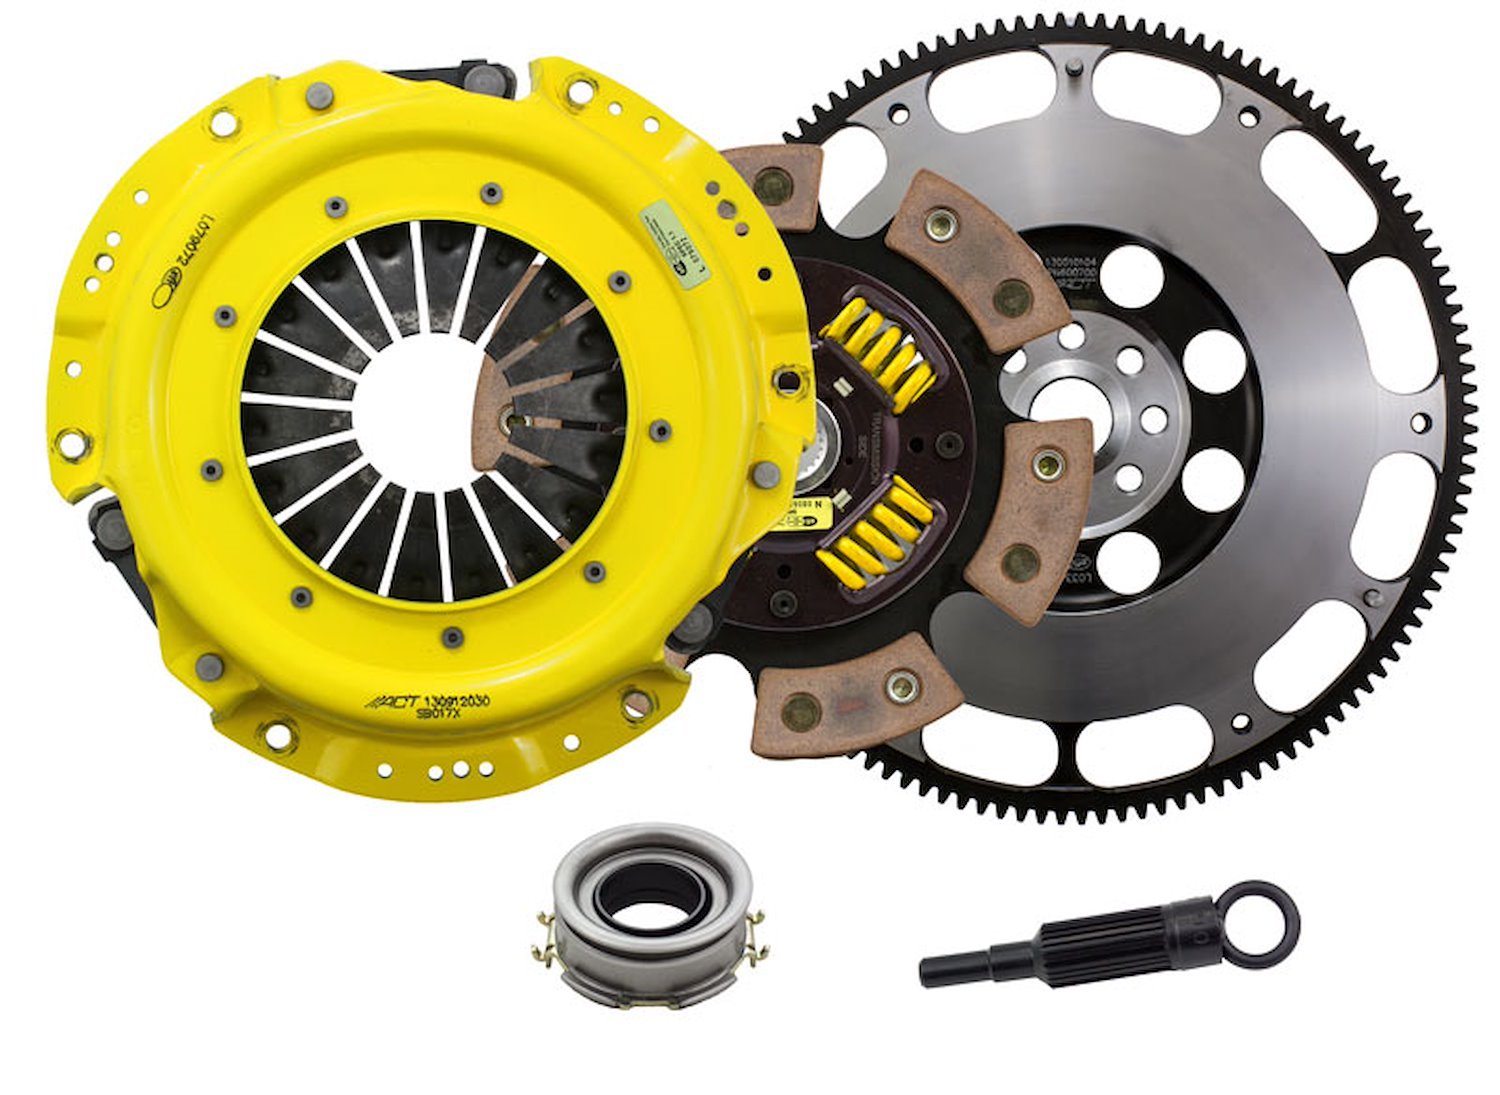 XT/Race Sprung 6-Pad Transmission Clutch Kit Fits Select Multiple Makes/Models